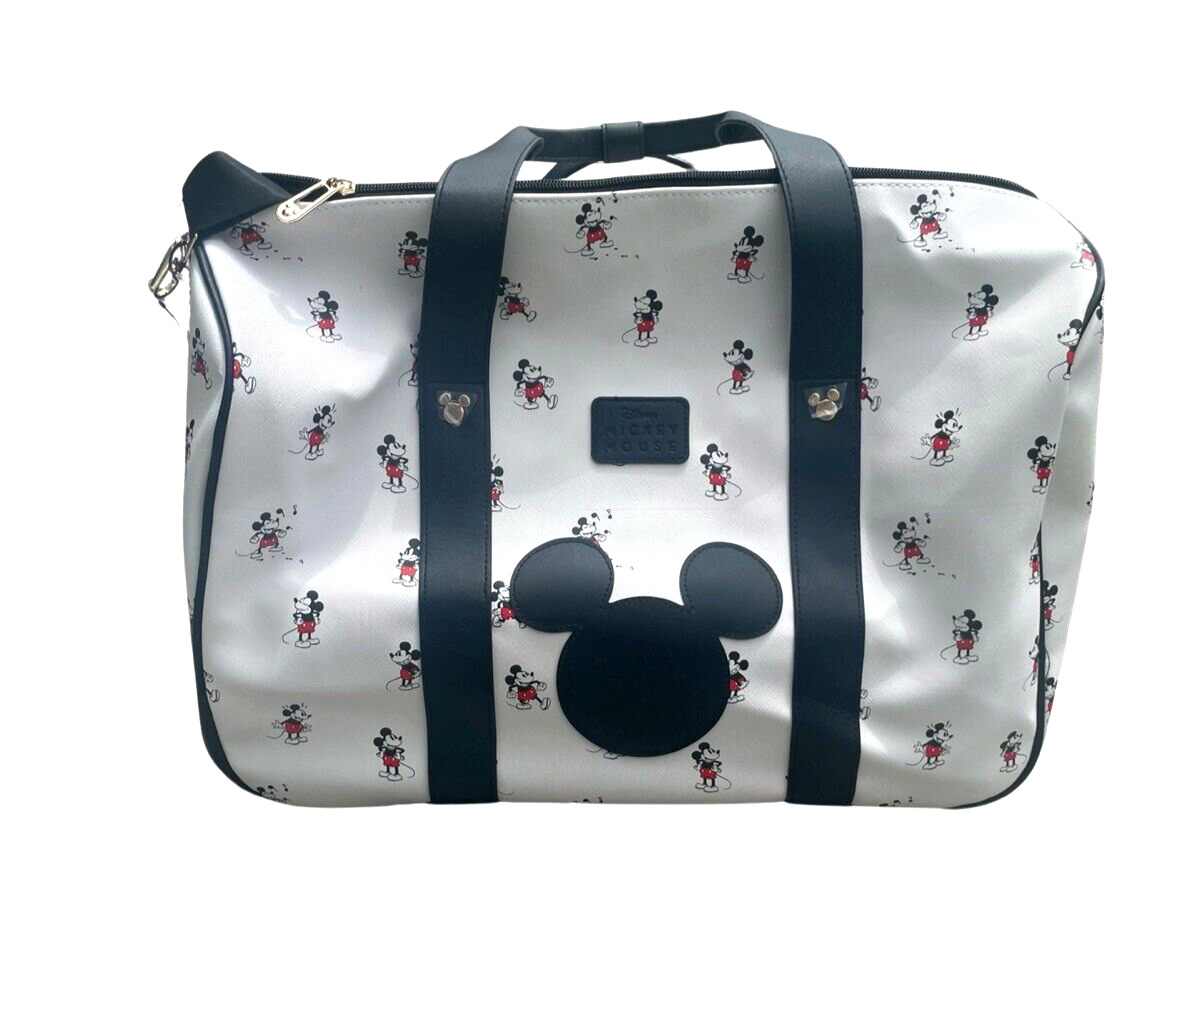 BIOWORLD DISNEY MICKEY MOUSE LARGE DUFFLE BAG WITH WHEELS WHITE & BLACK NWT